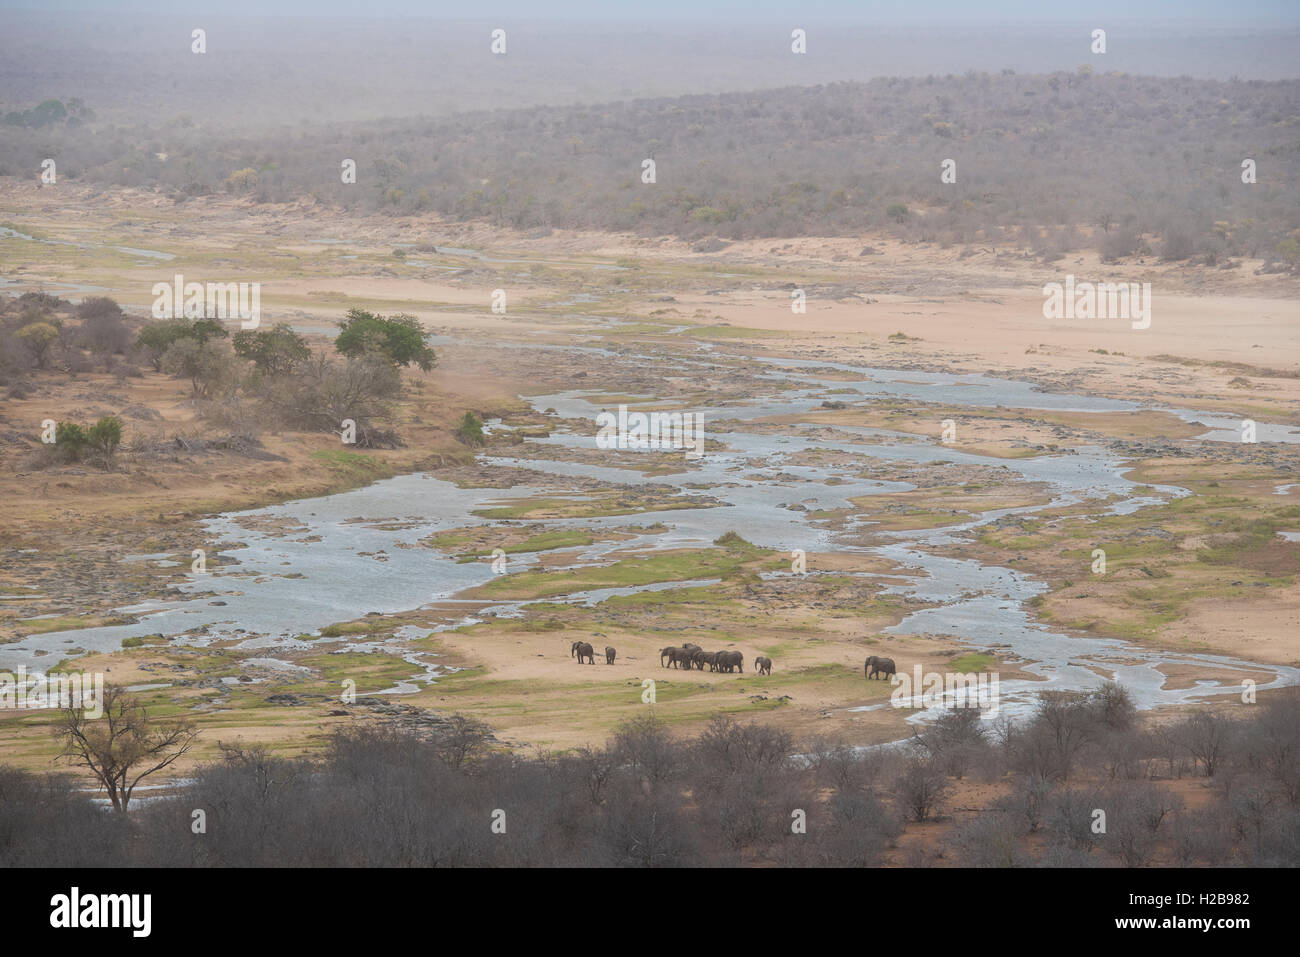 Herd of elephants crossing the low Olifants River on a  windy, hazy day due to the sand been blown around Stock Photo